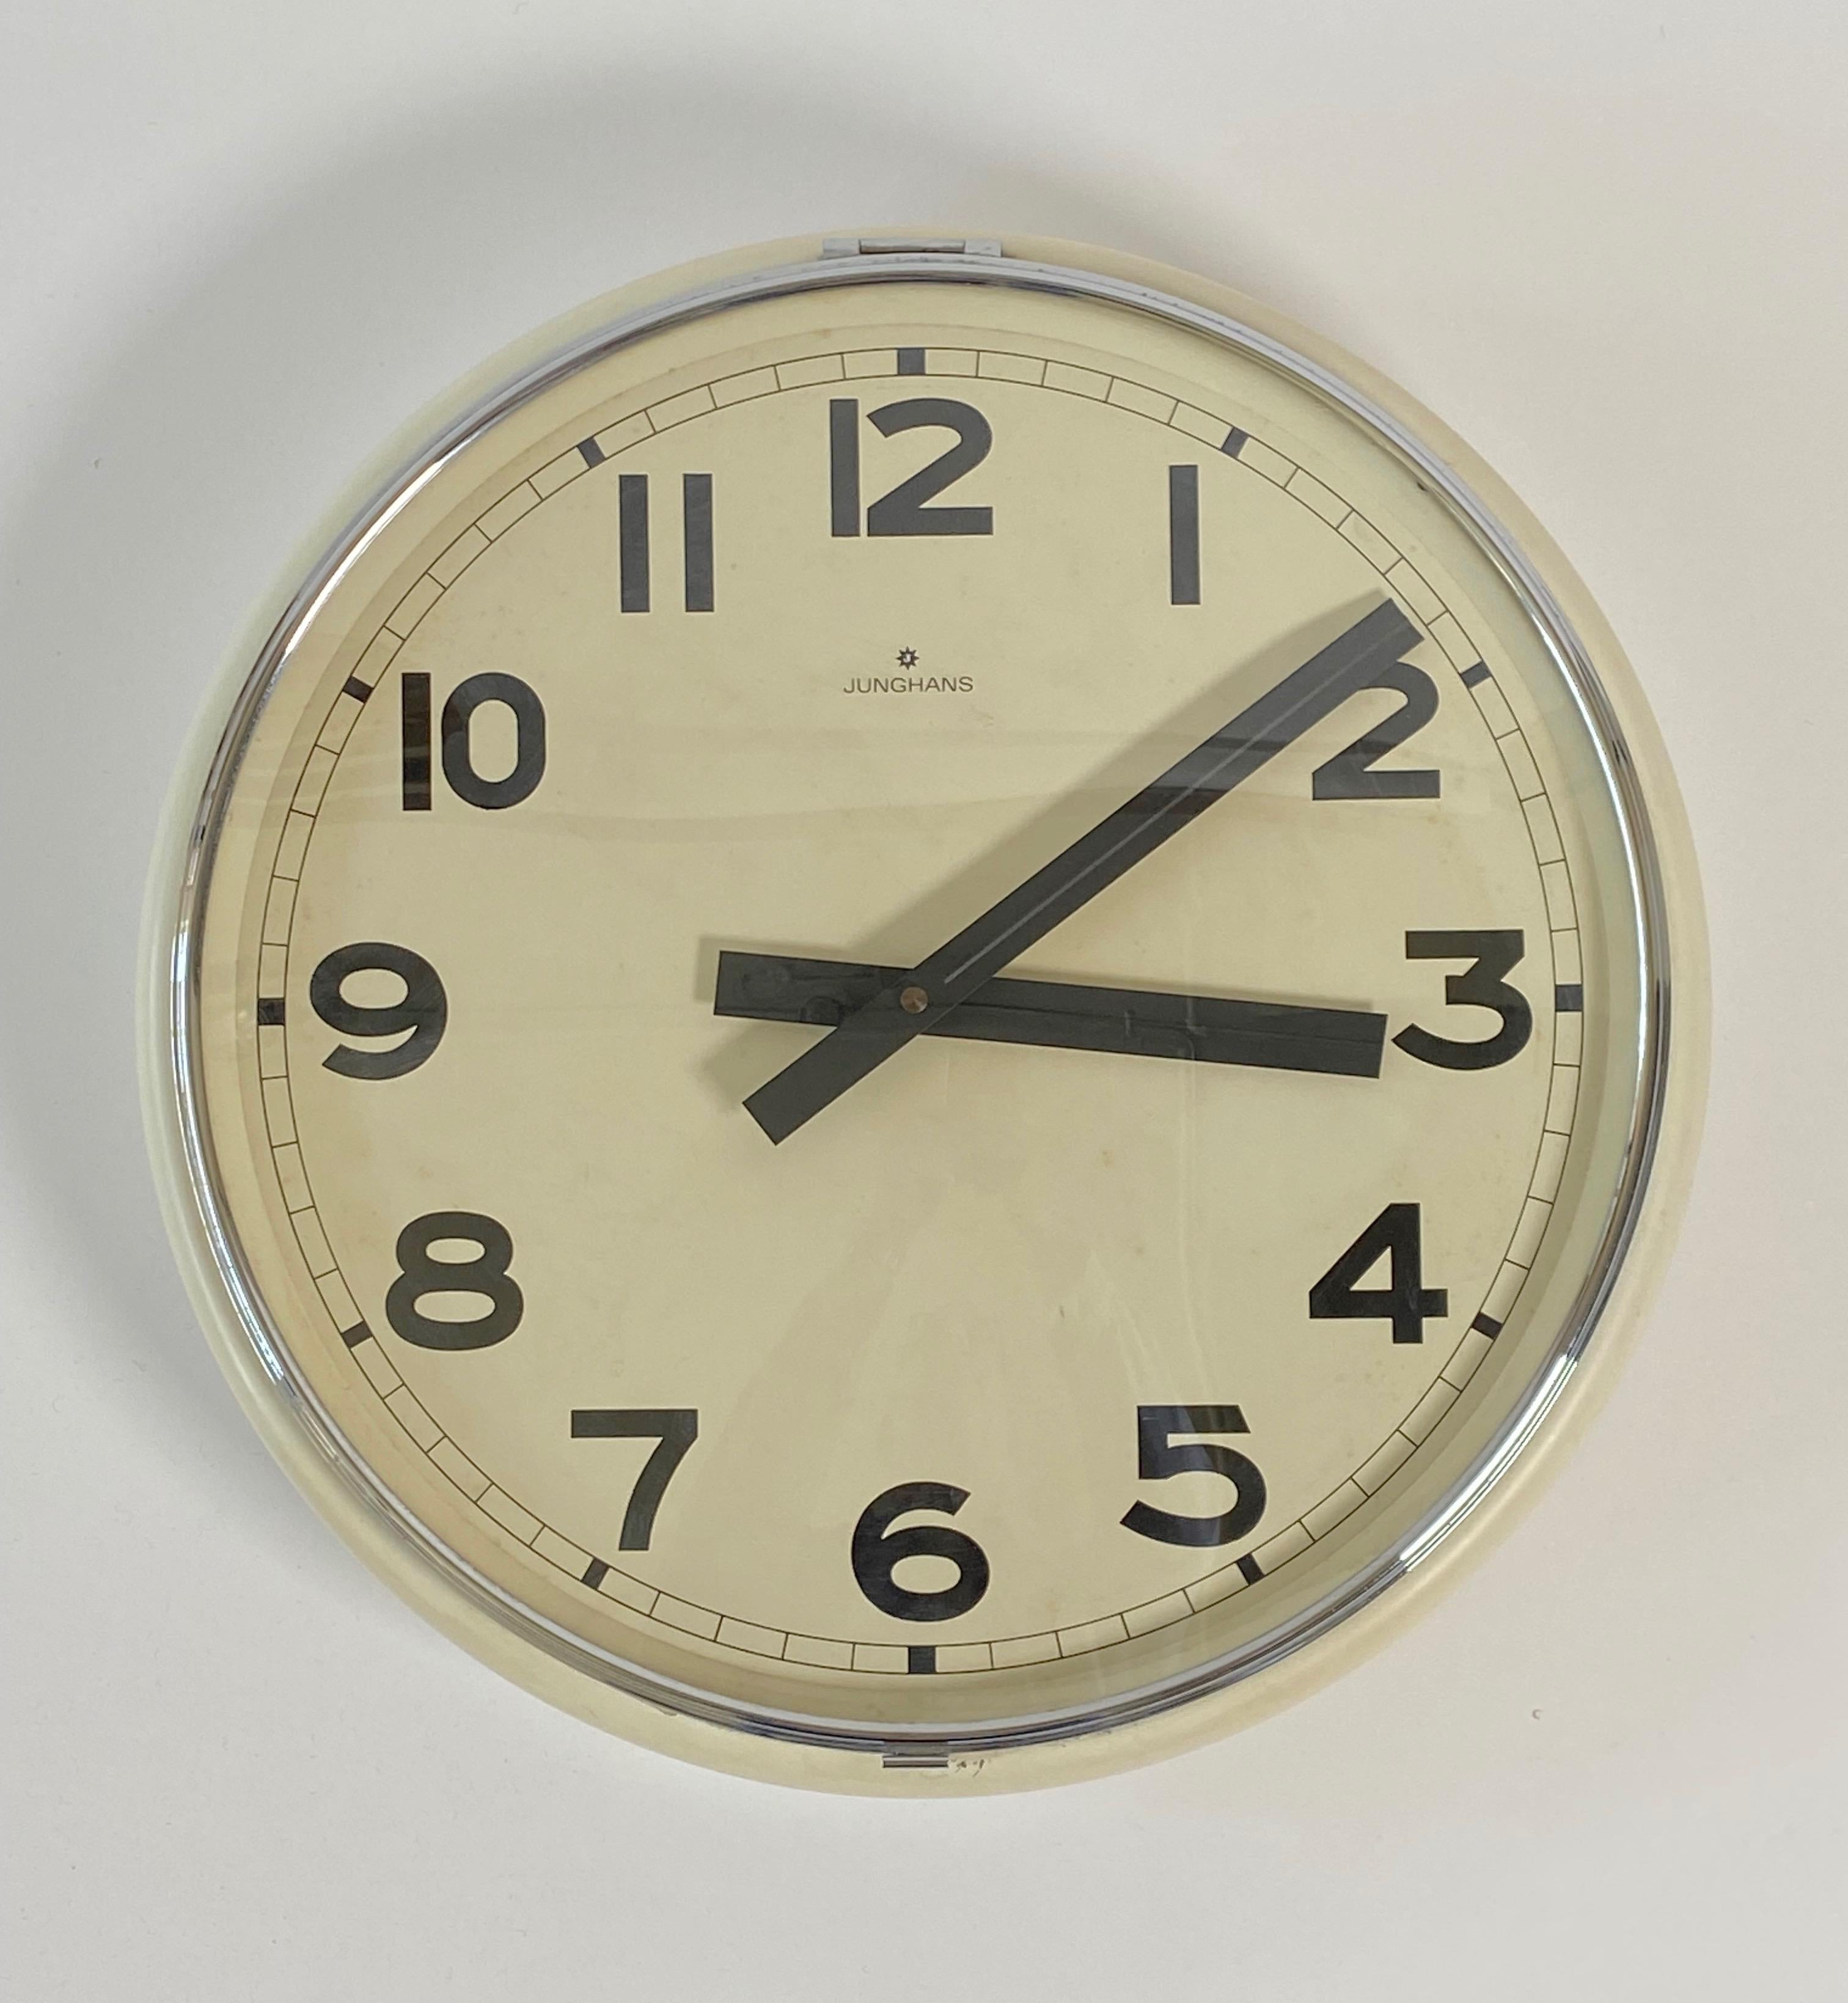 1960s Wall clock by Junghans of Germany with an off white cream colored case and a chromed frame glass lift up front cover. The hands are black with a raised center and squared off at each end. The Arabic numbers are big and bold and the over all